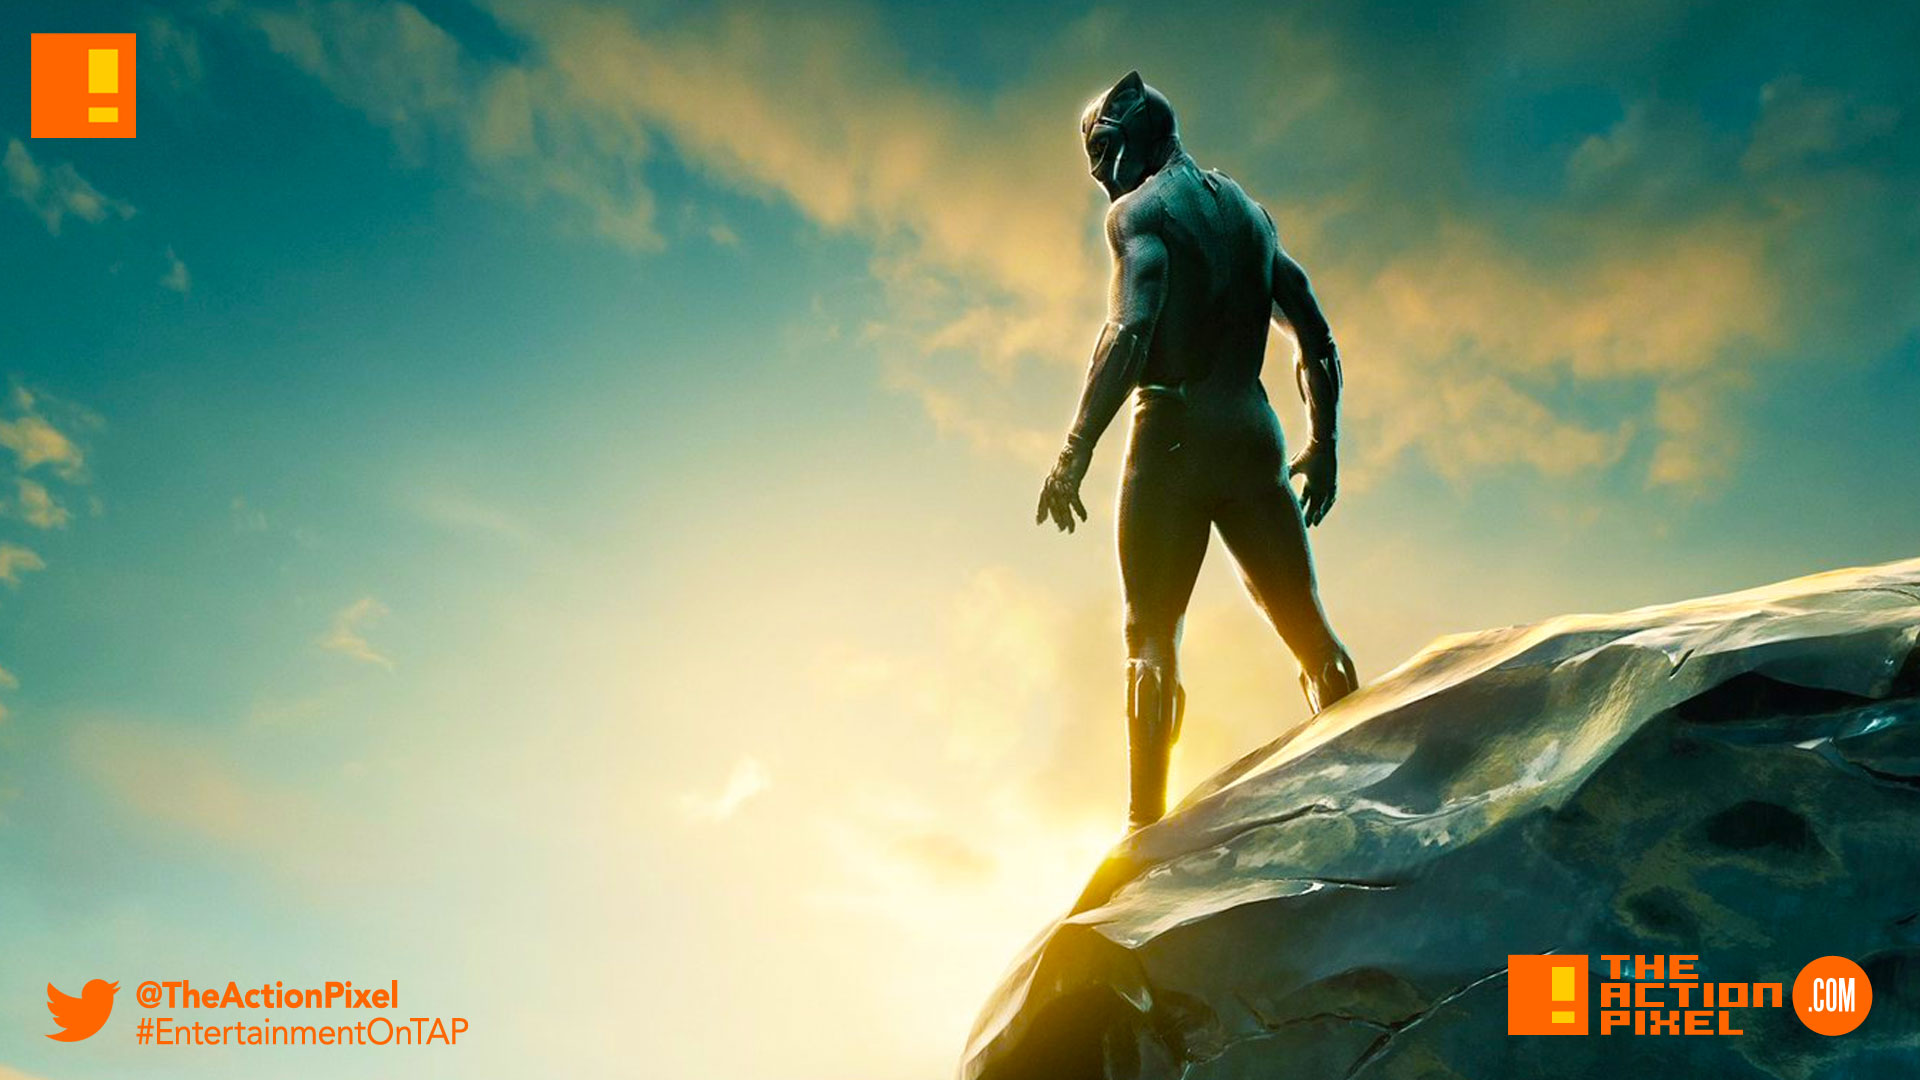 black panther,poster, black panther,marvel studios, marvel, comics, chadwick boseman, gritty, black panther, movie, entertainment on tap, sdcc, comic-con